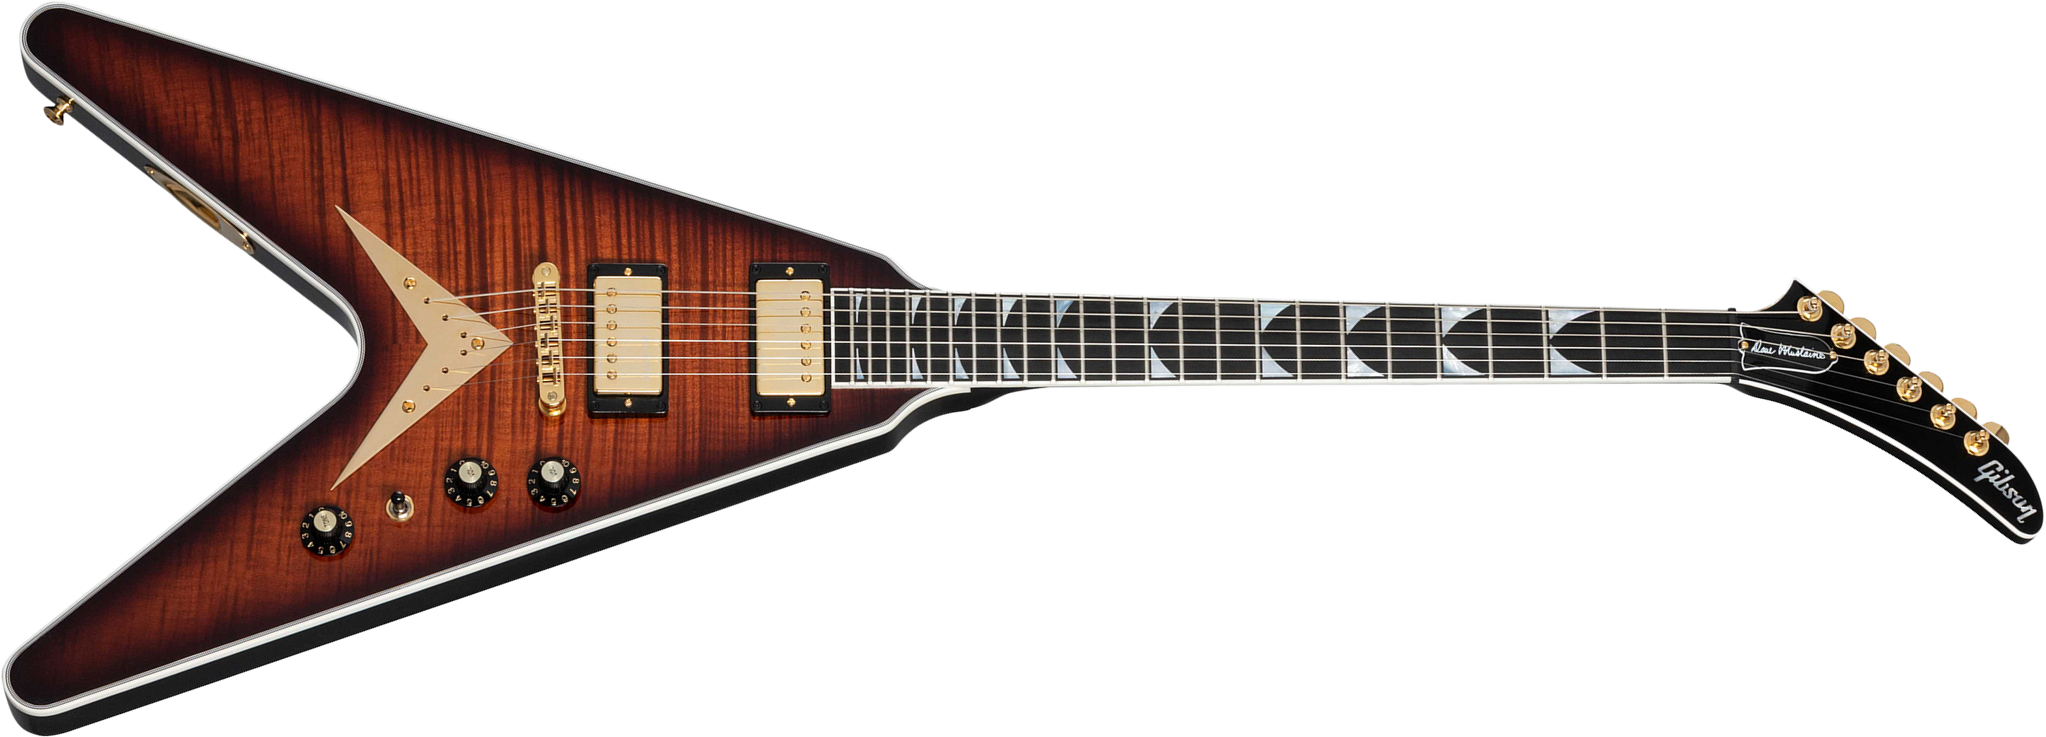 Gibson Custom Shop Dave Mustaine Flying V Exp Ltd Signature 2h Ht Eb - Red Amber Burst - Guitarra electrica metalica - Main picture